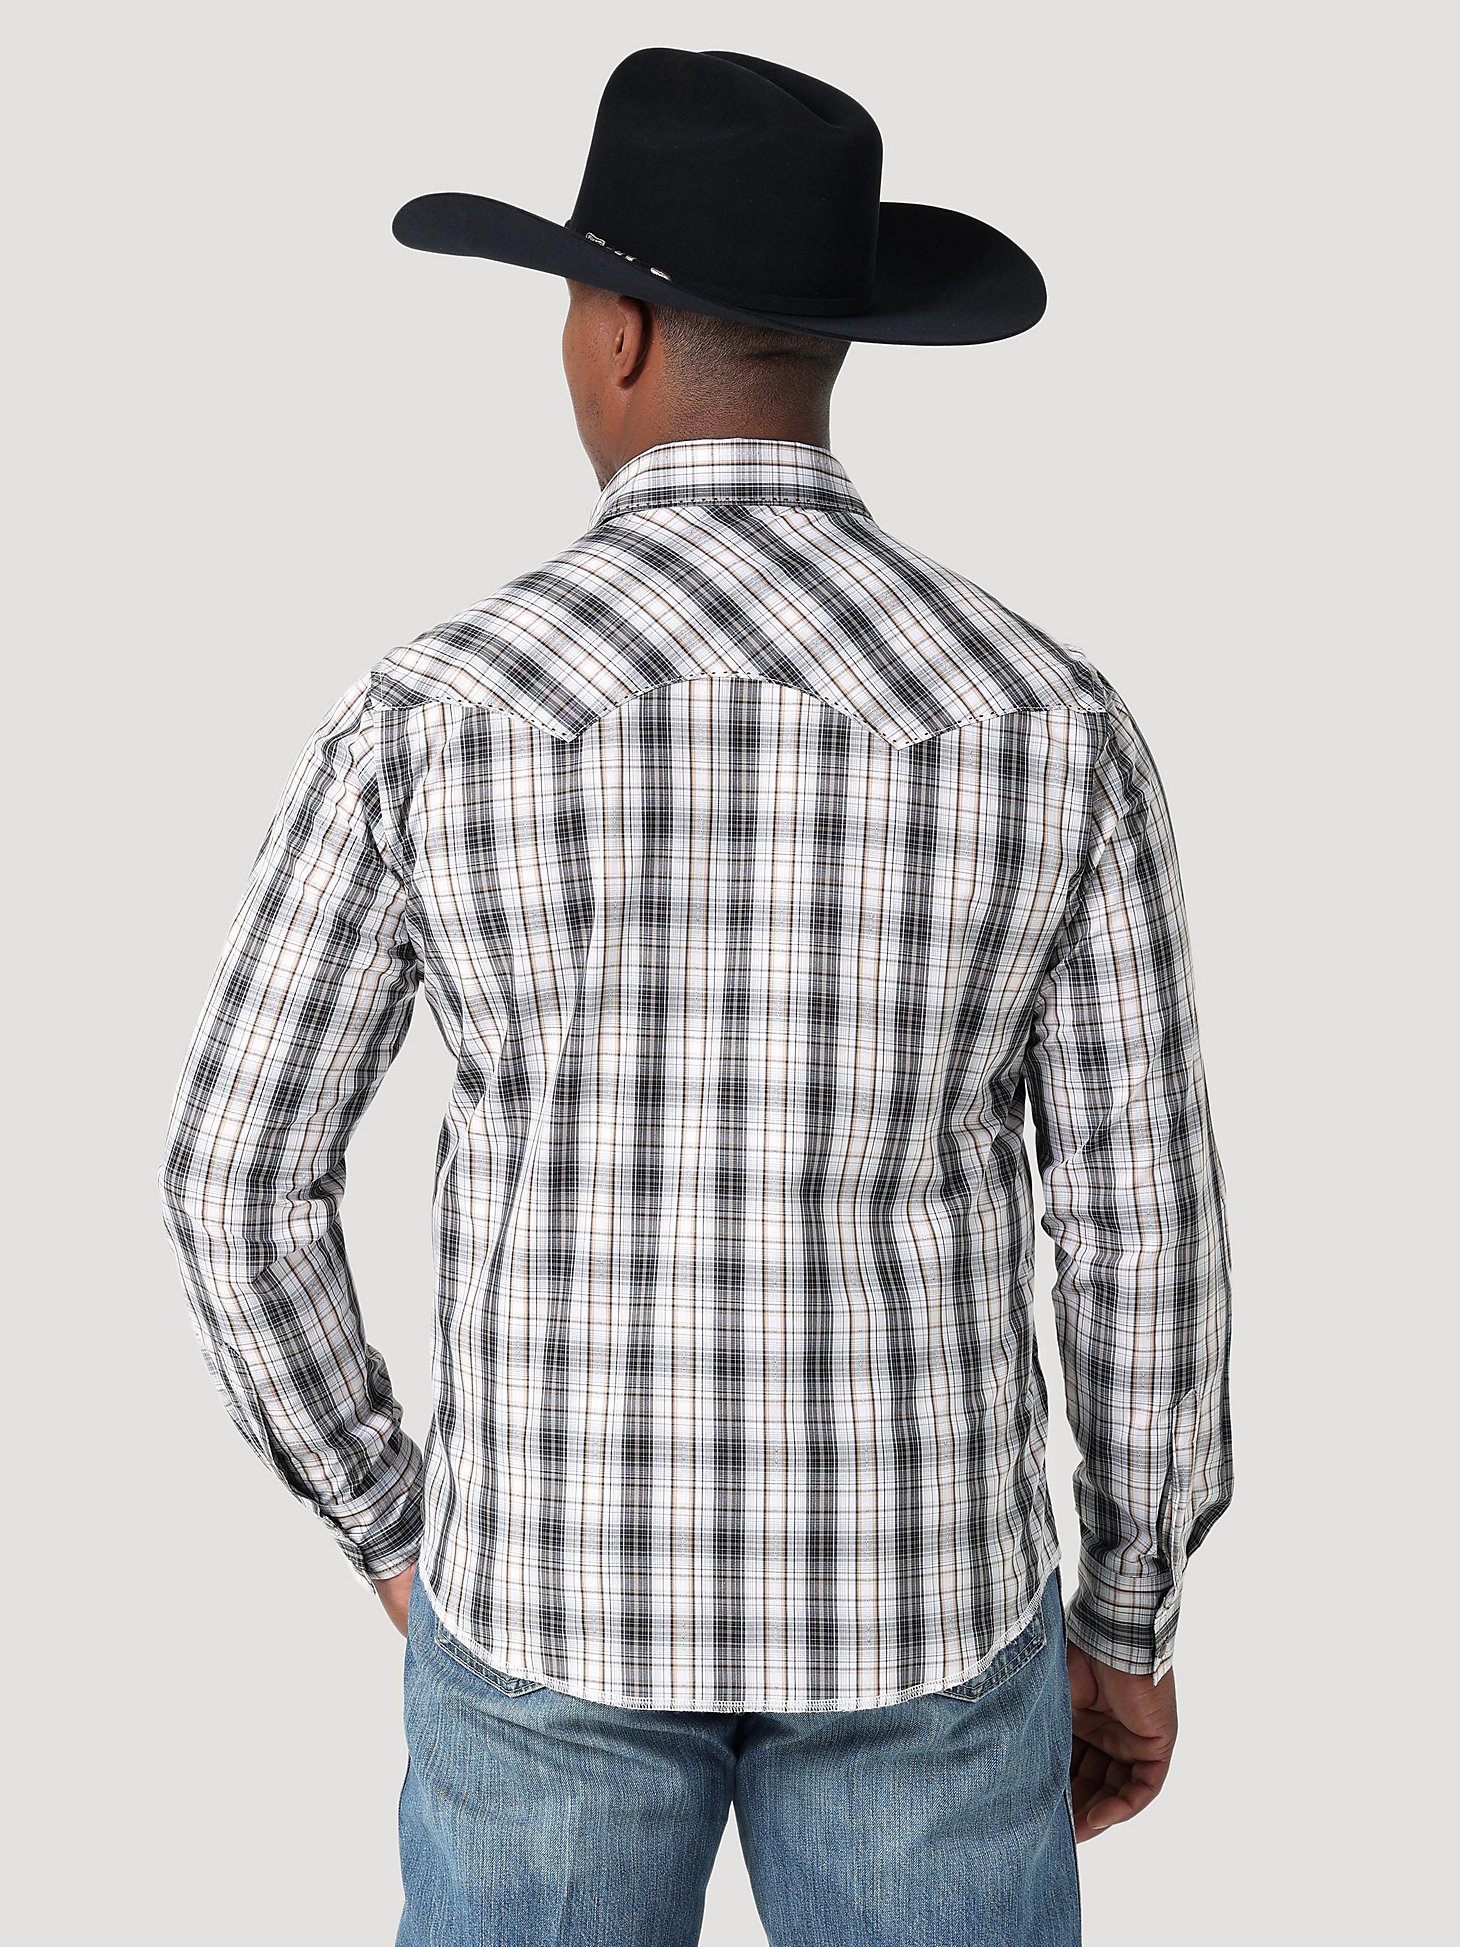 Men's Long Sleeve Fashion Western Snap Plaid Shirt in Squall alternative view 1